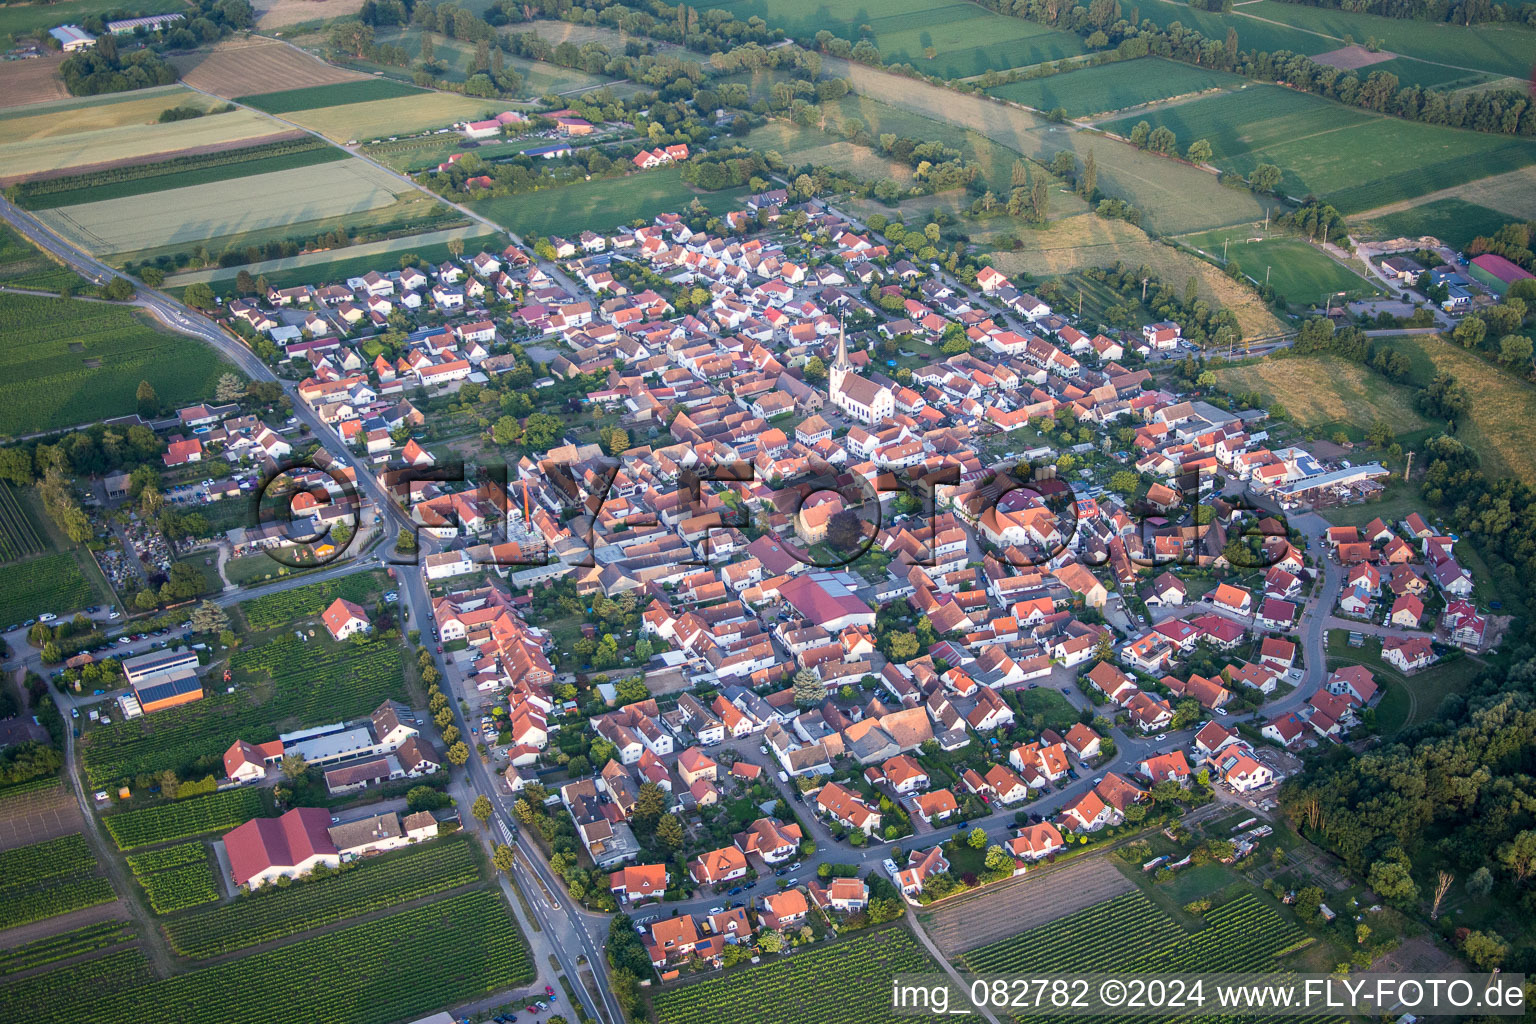 Oblique view of Village - view on the edge of agricultural fields and farmland in Venningen in the state Rhineland-Palatinate, Germany